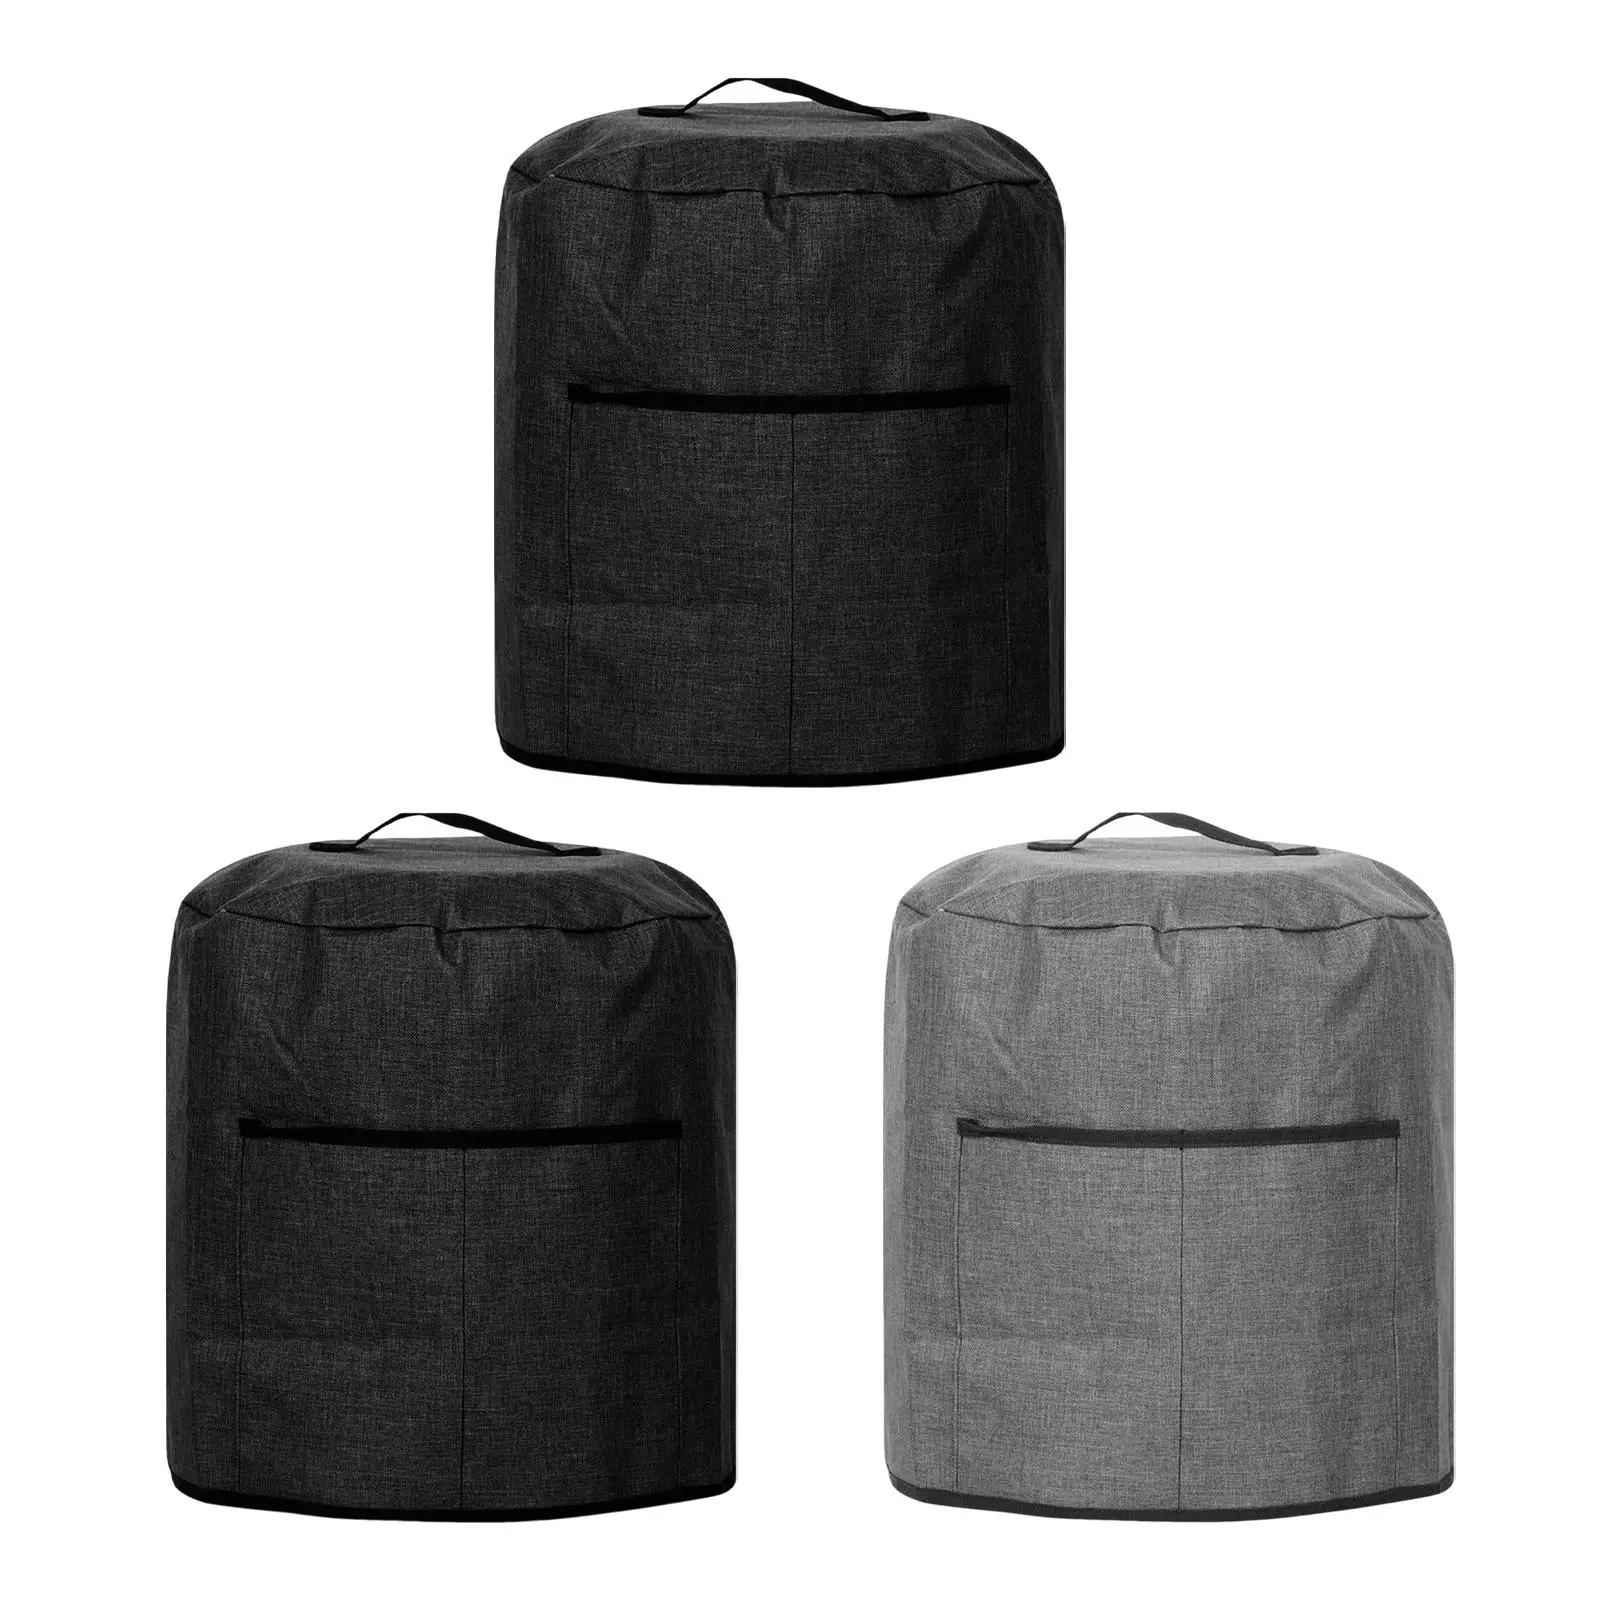 Air Fryer Dust Cover Restaurant easy to Clean Lightweight Household Storage Pockets for Cooker Air Fryer Cookware Pot Oven